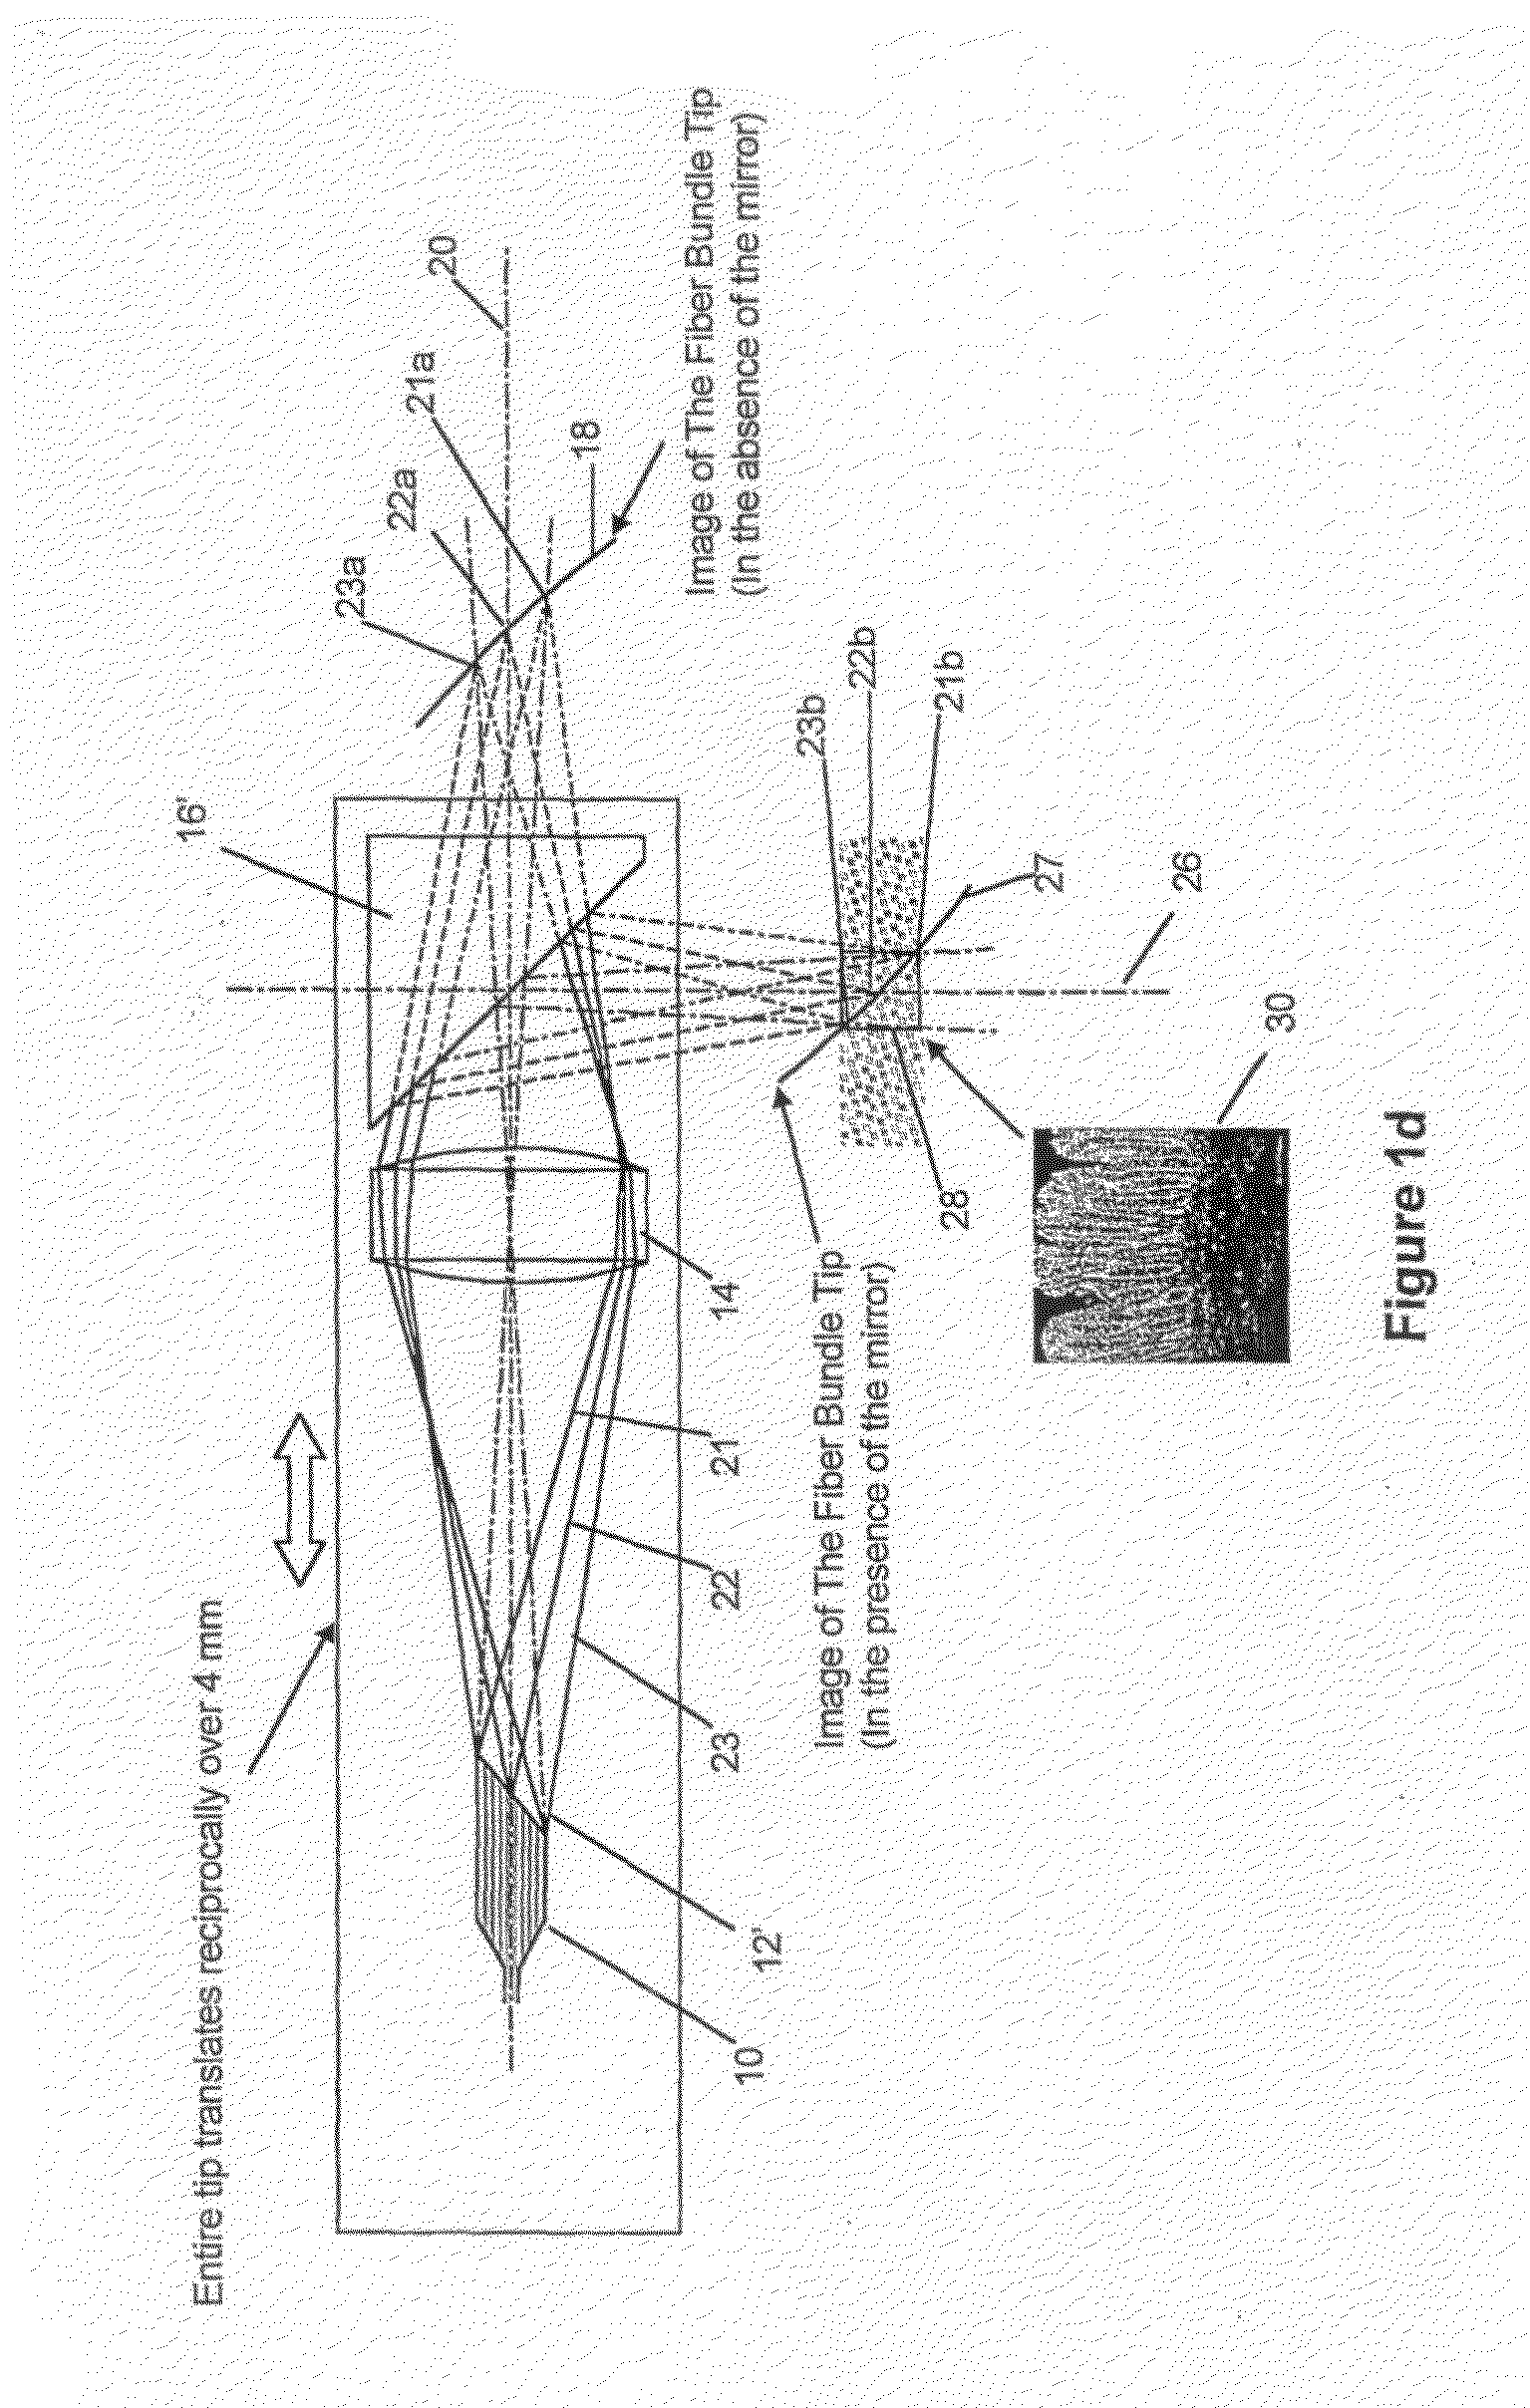 Method and apparatus for high resolution coherent optical imaging